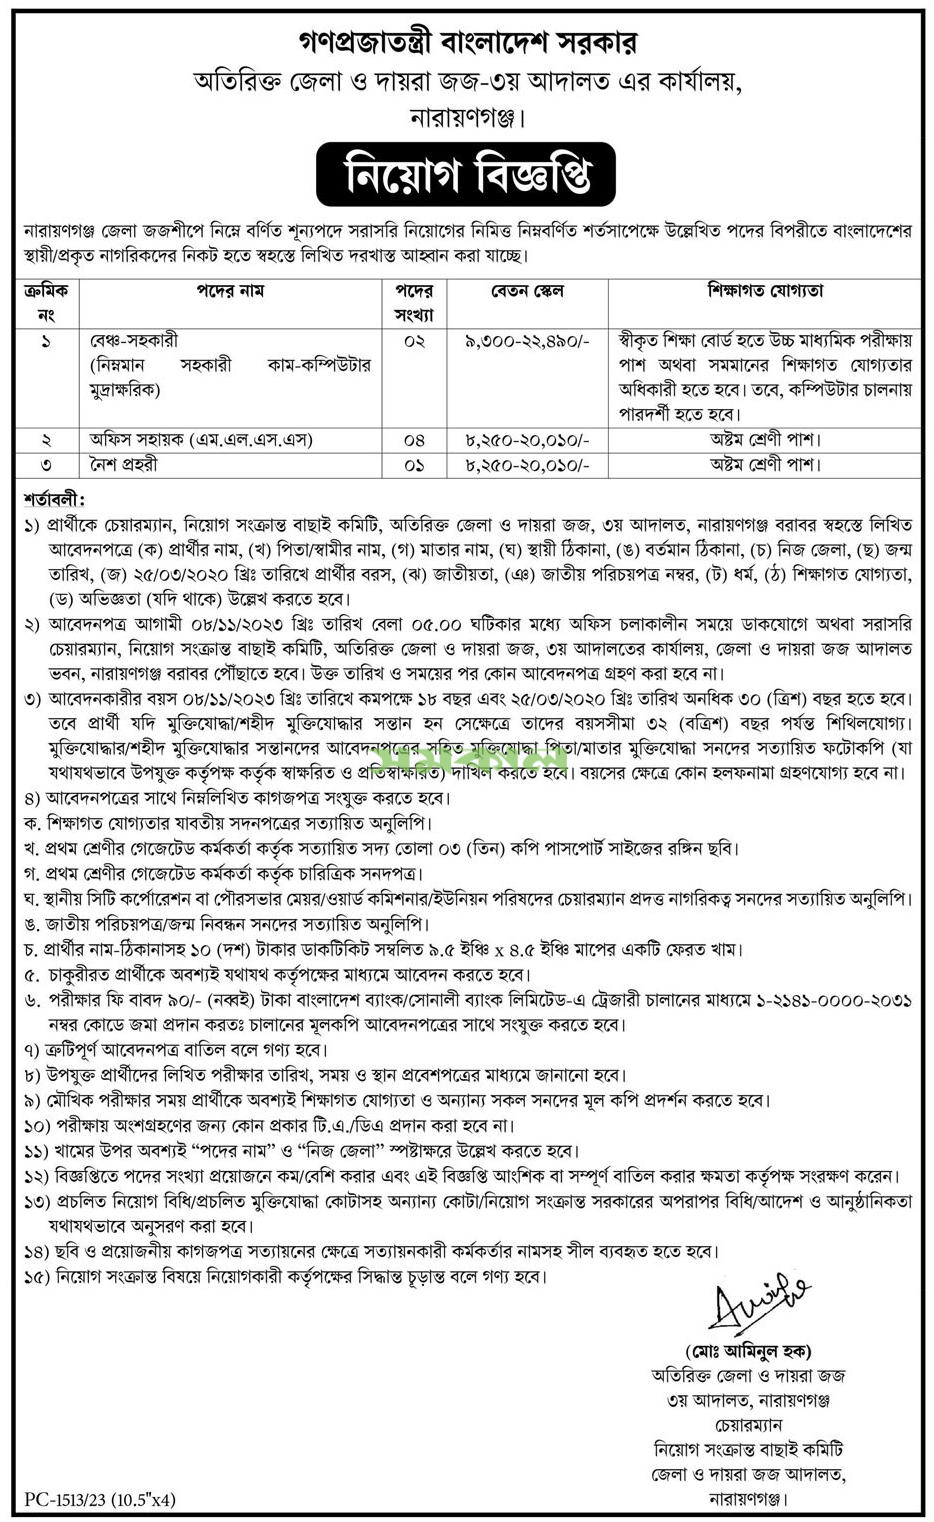 Bangladesh Office of the Additional District and Sessions Judge-3rd Court Job Circular - 2023